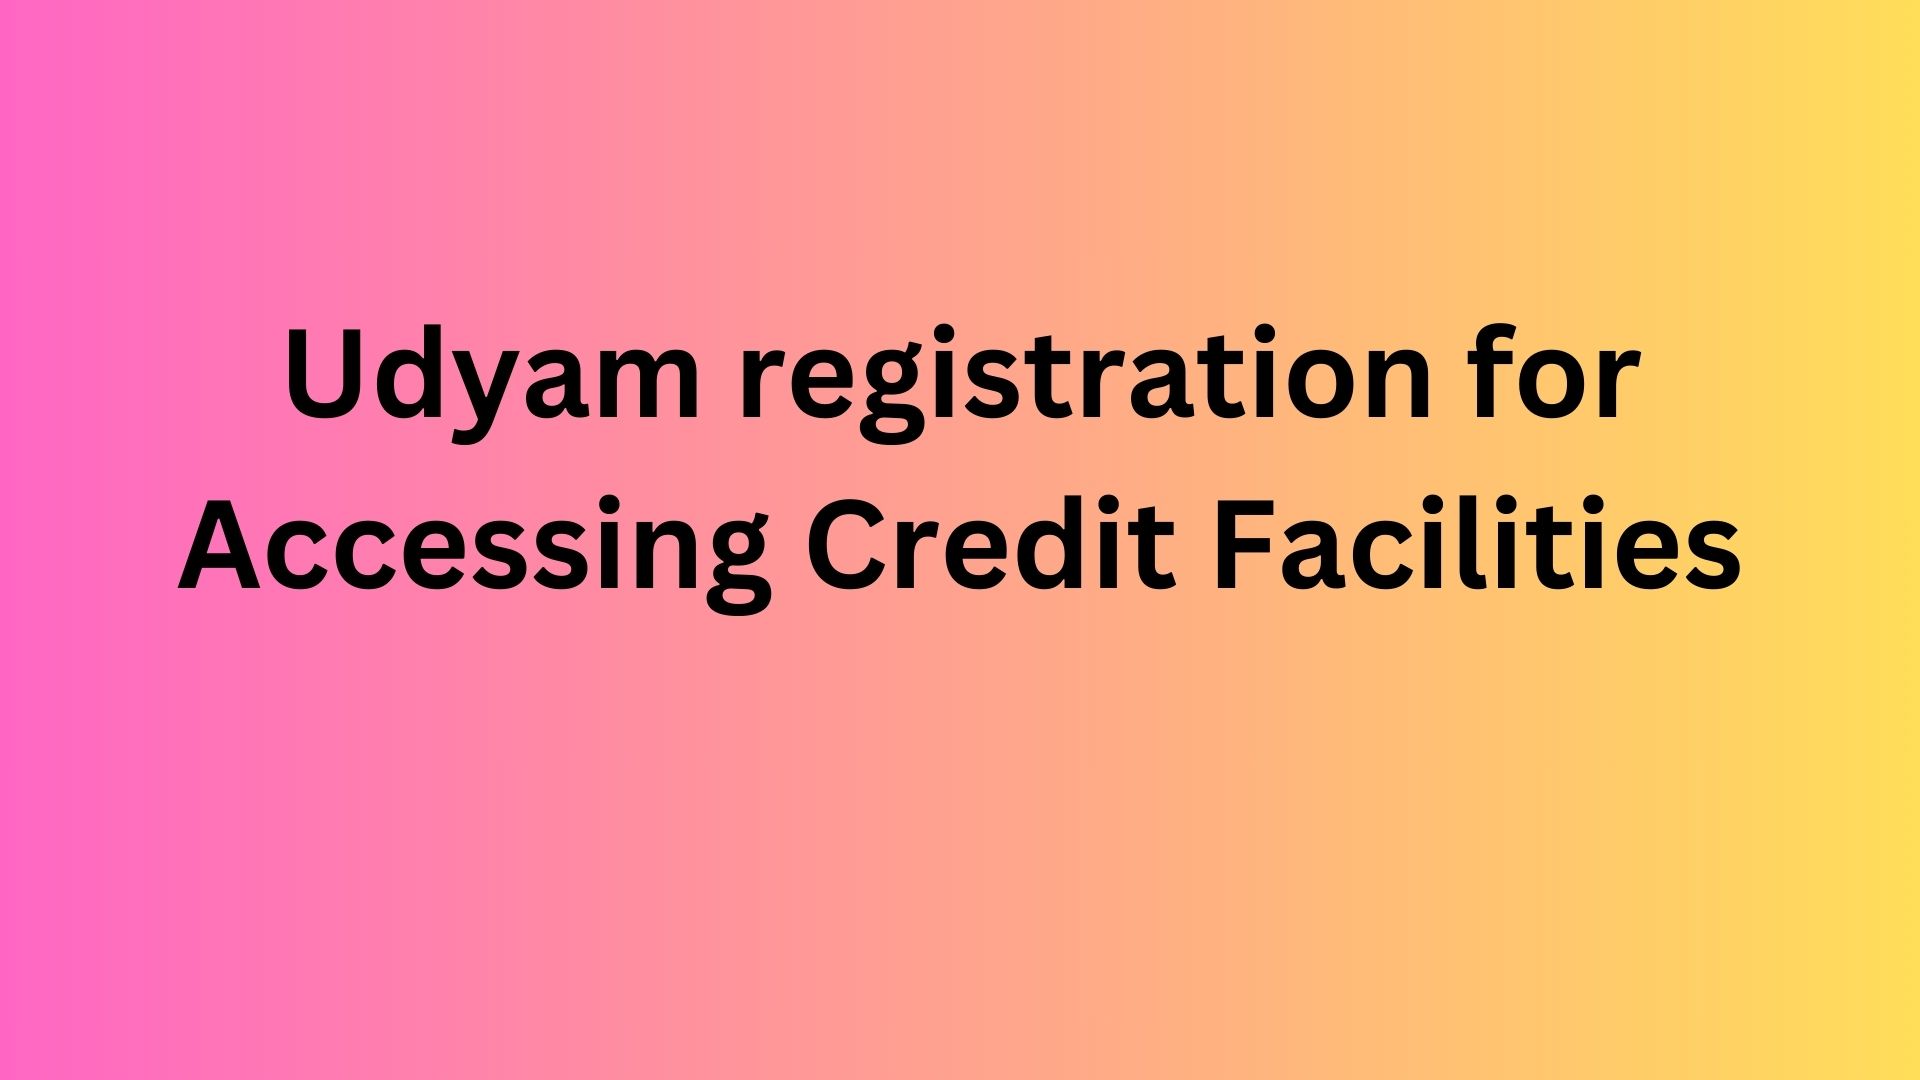 Udyam registration for Accessing Credit Facilities